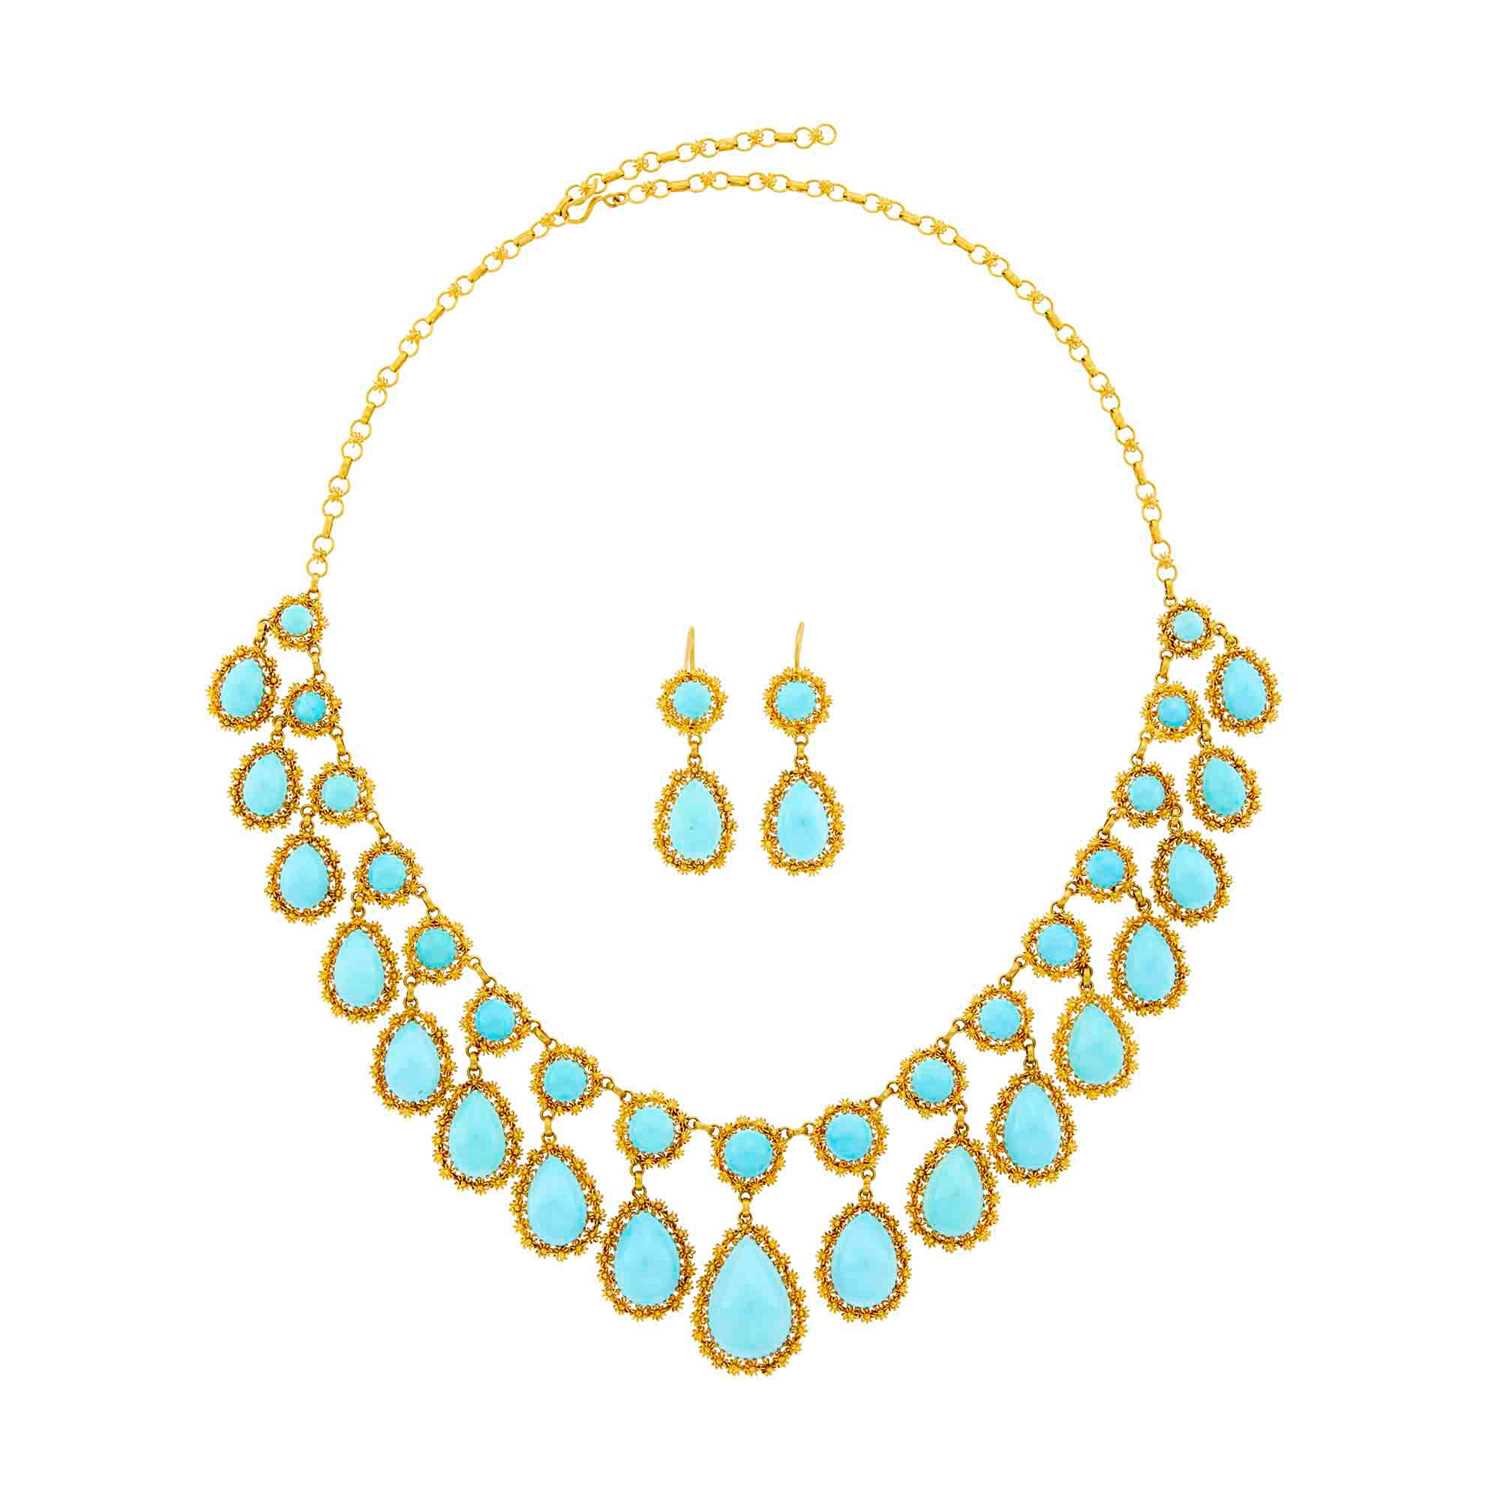 Lot 1212 - Gold and Turquoise Fringe Necklace and Pair of Pendant-Earrings